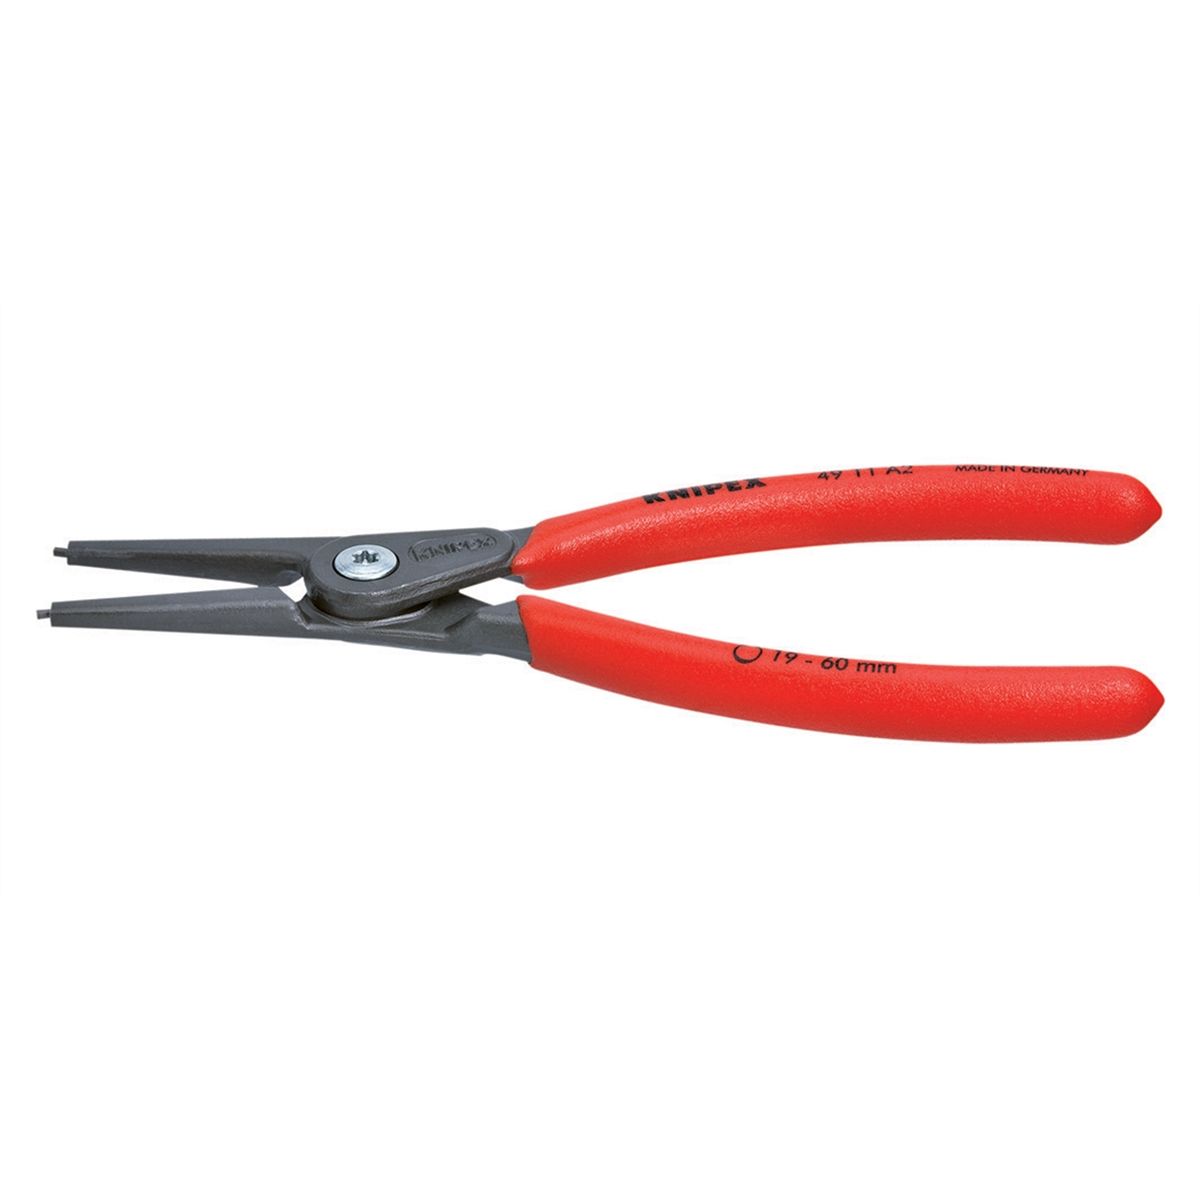 7 1/4" Precision Circlip "Snap-Ring" Pliers for External Straigh